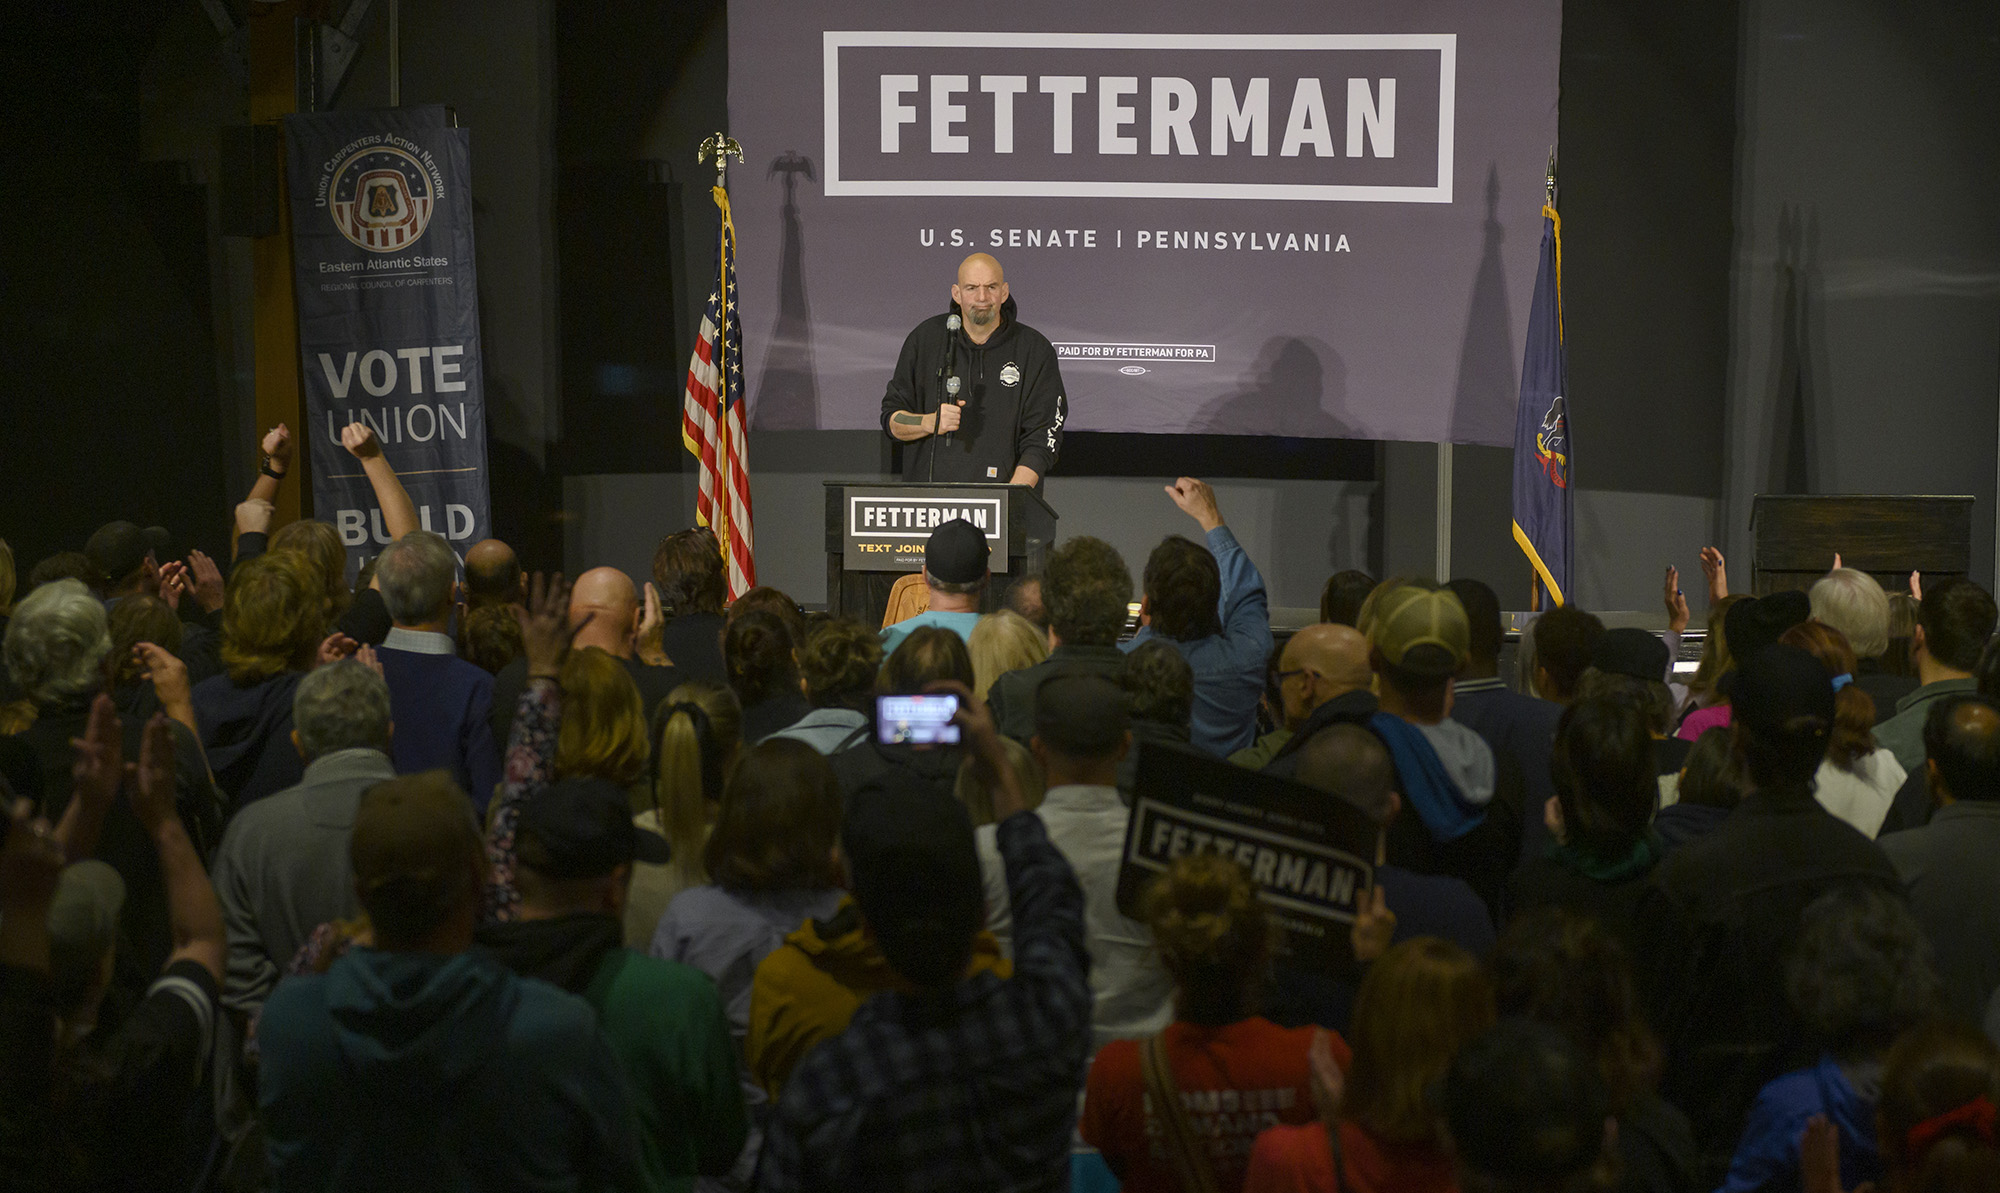 Pennsylvania Democratic candidate for Senate Lt. Governor John Fetterman speaks to supporters during a rally at the Carpenters Union Hall of Pittsburgh on November 7, in Pittsburgh, Pennsylvania. 